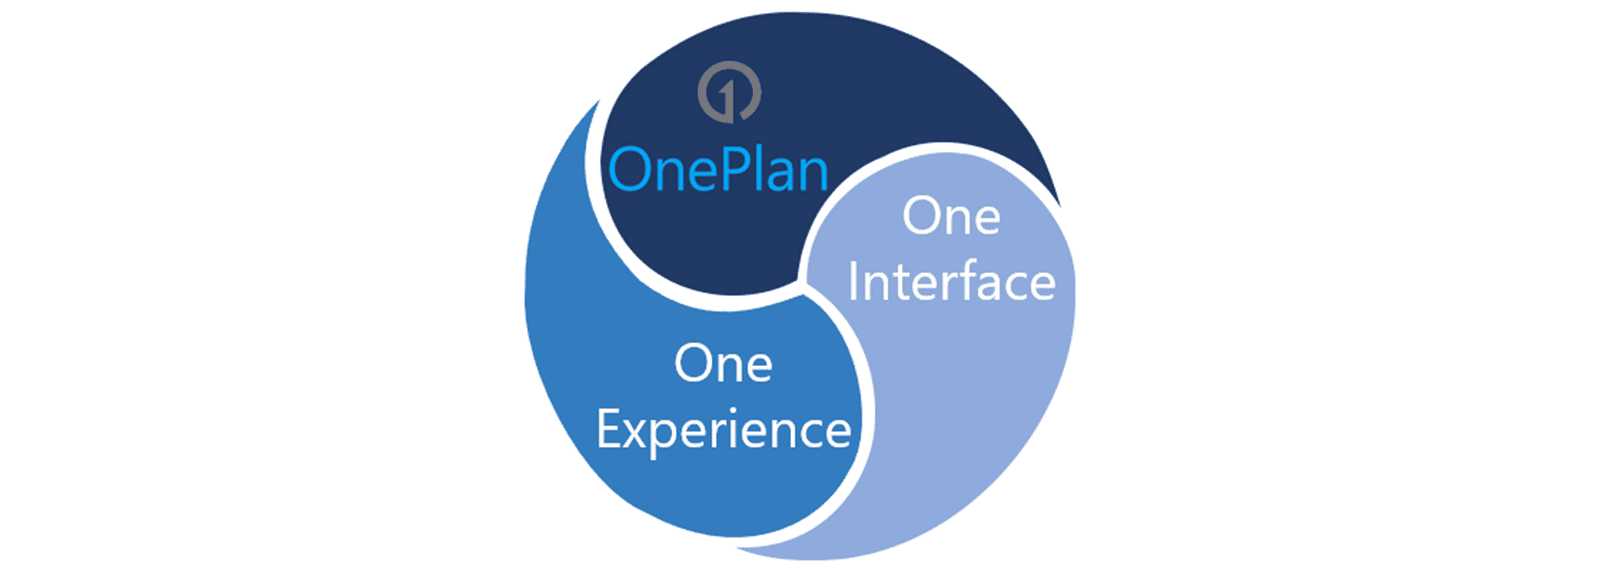 OnePlan is fused with the Microsoft User Experience